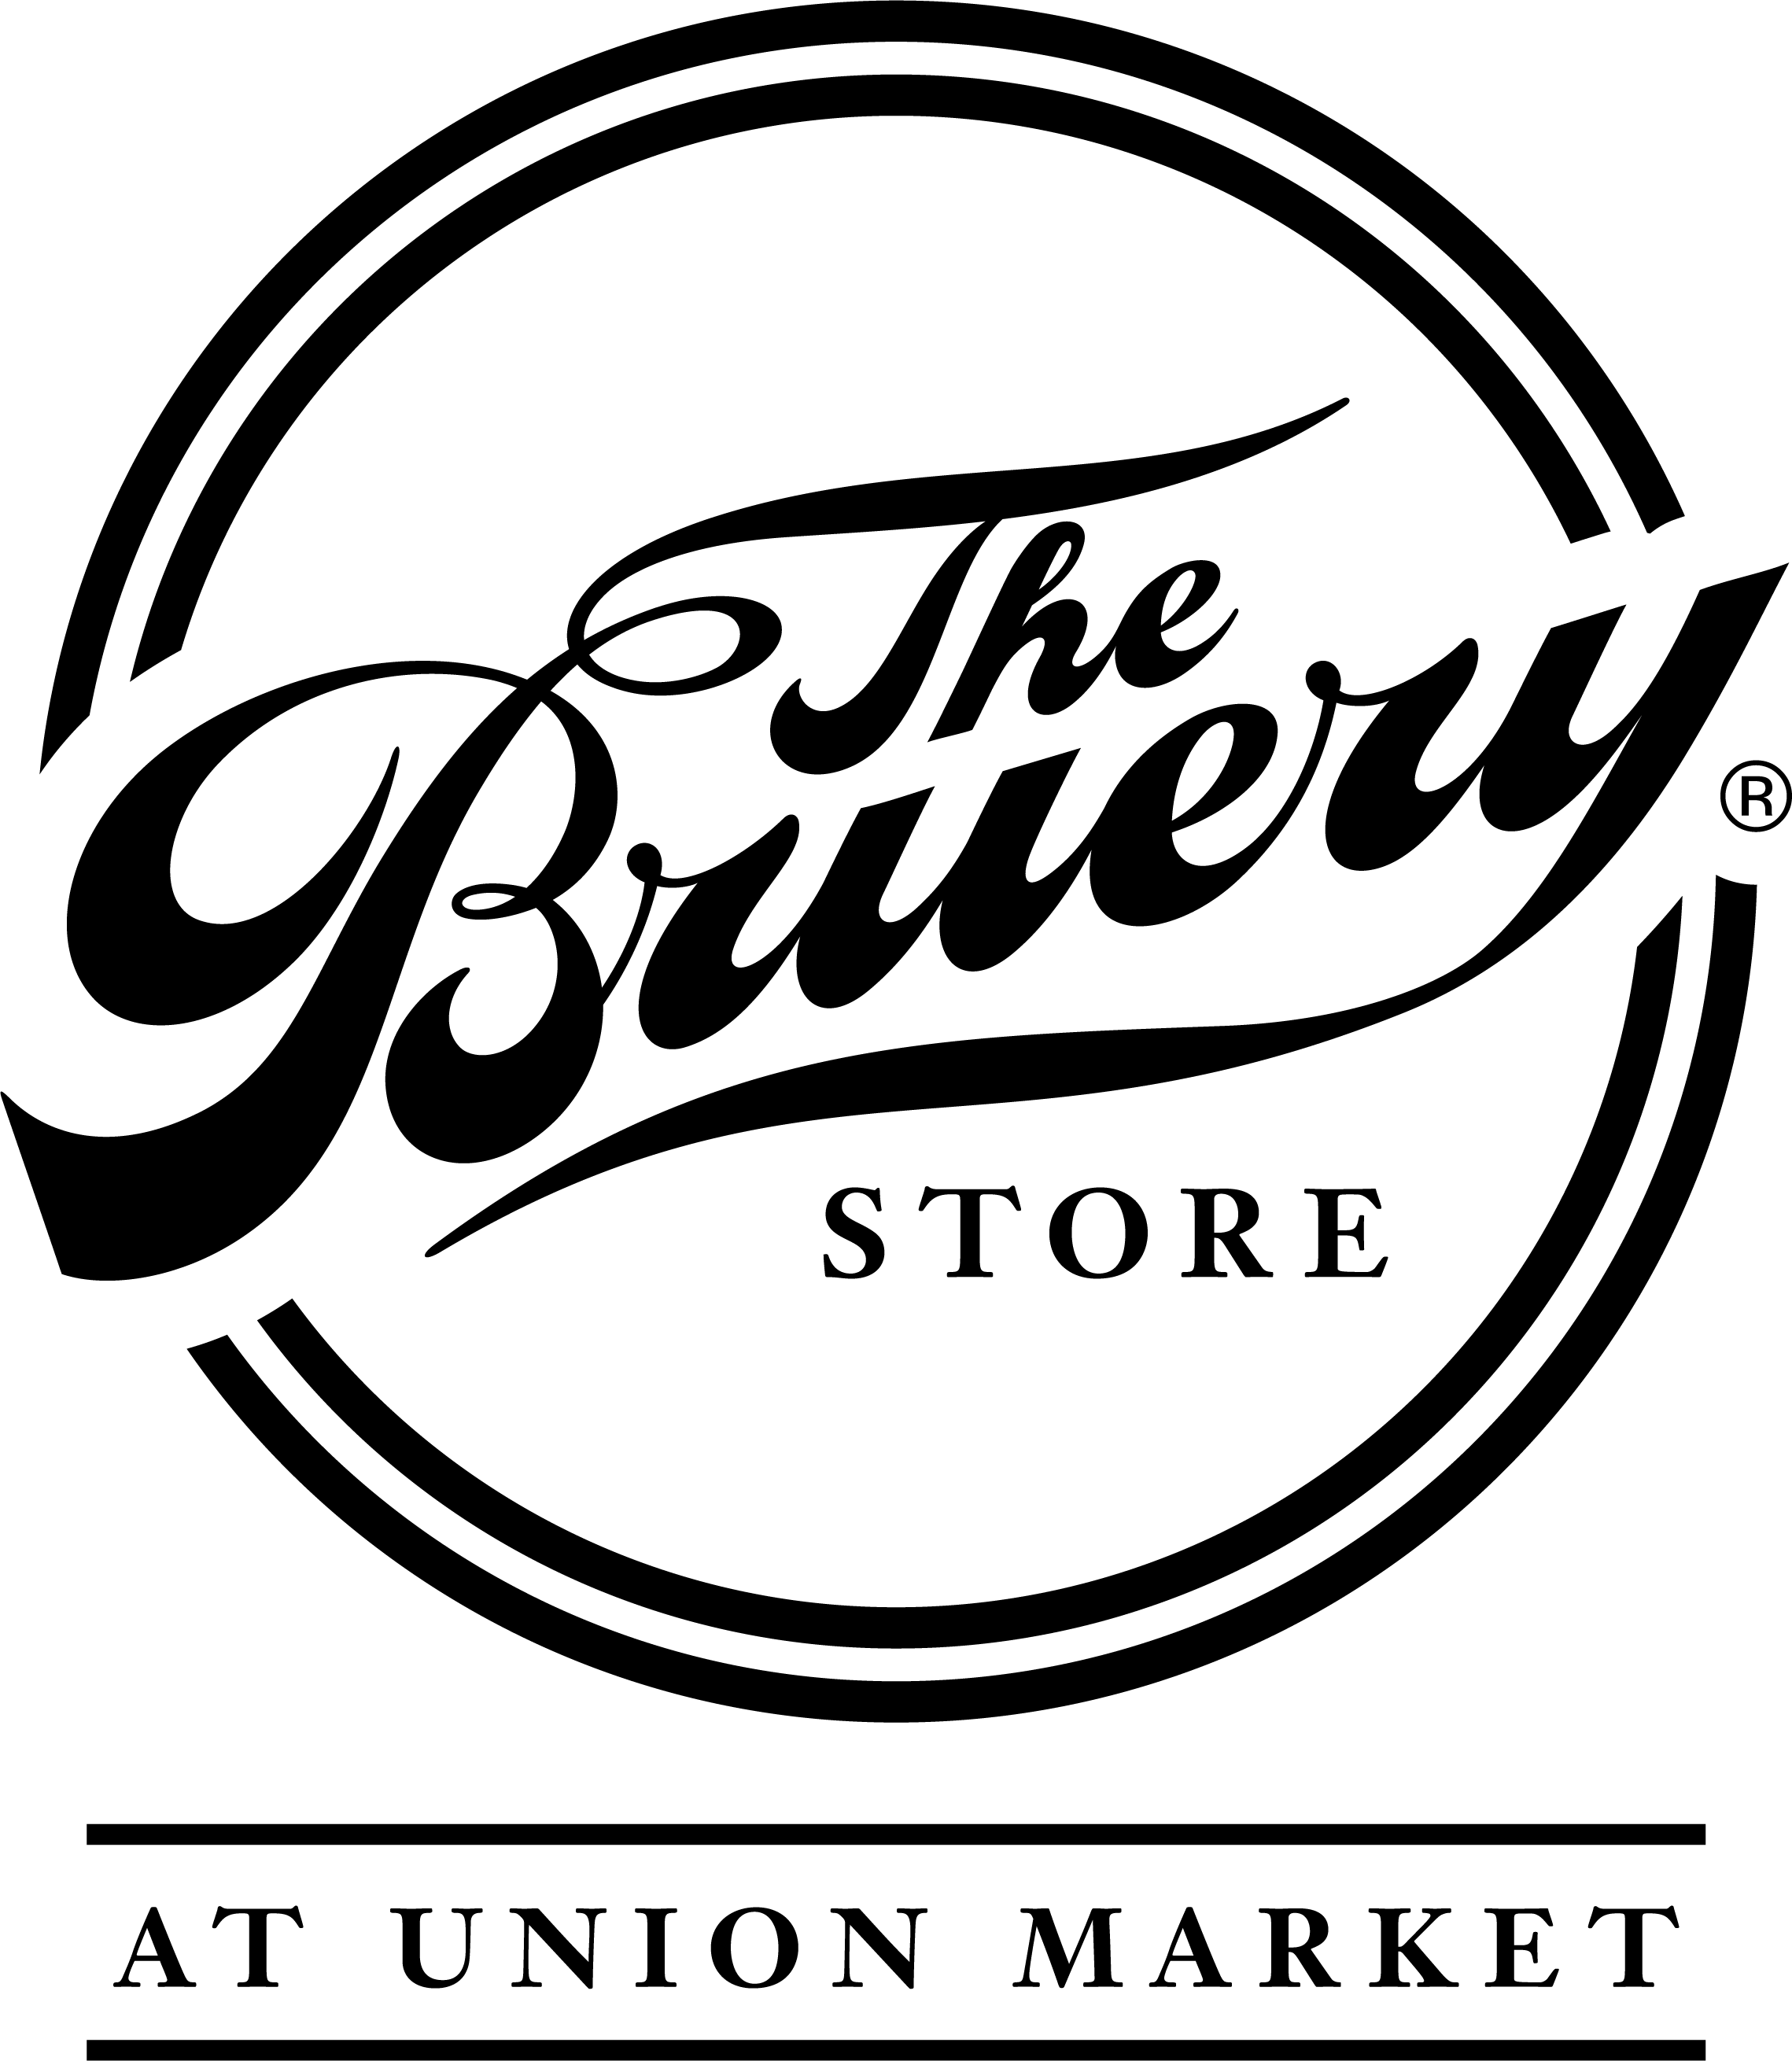 Bruery Logo - The East Coast is getting The Bruery Store | The Bruery